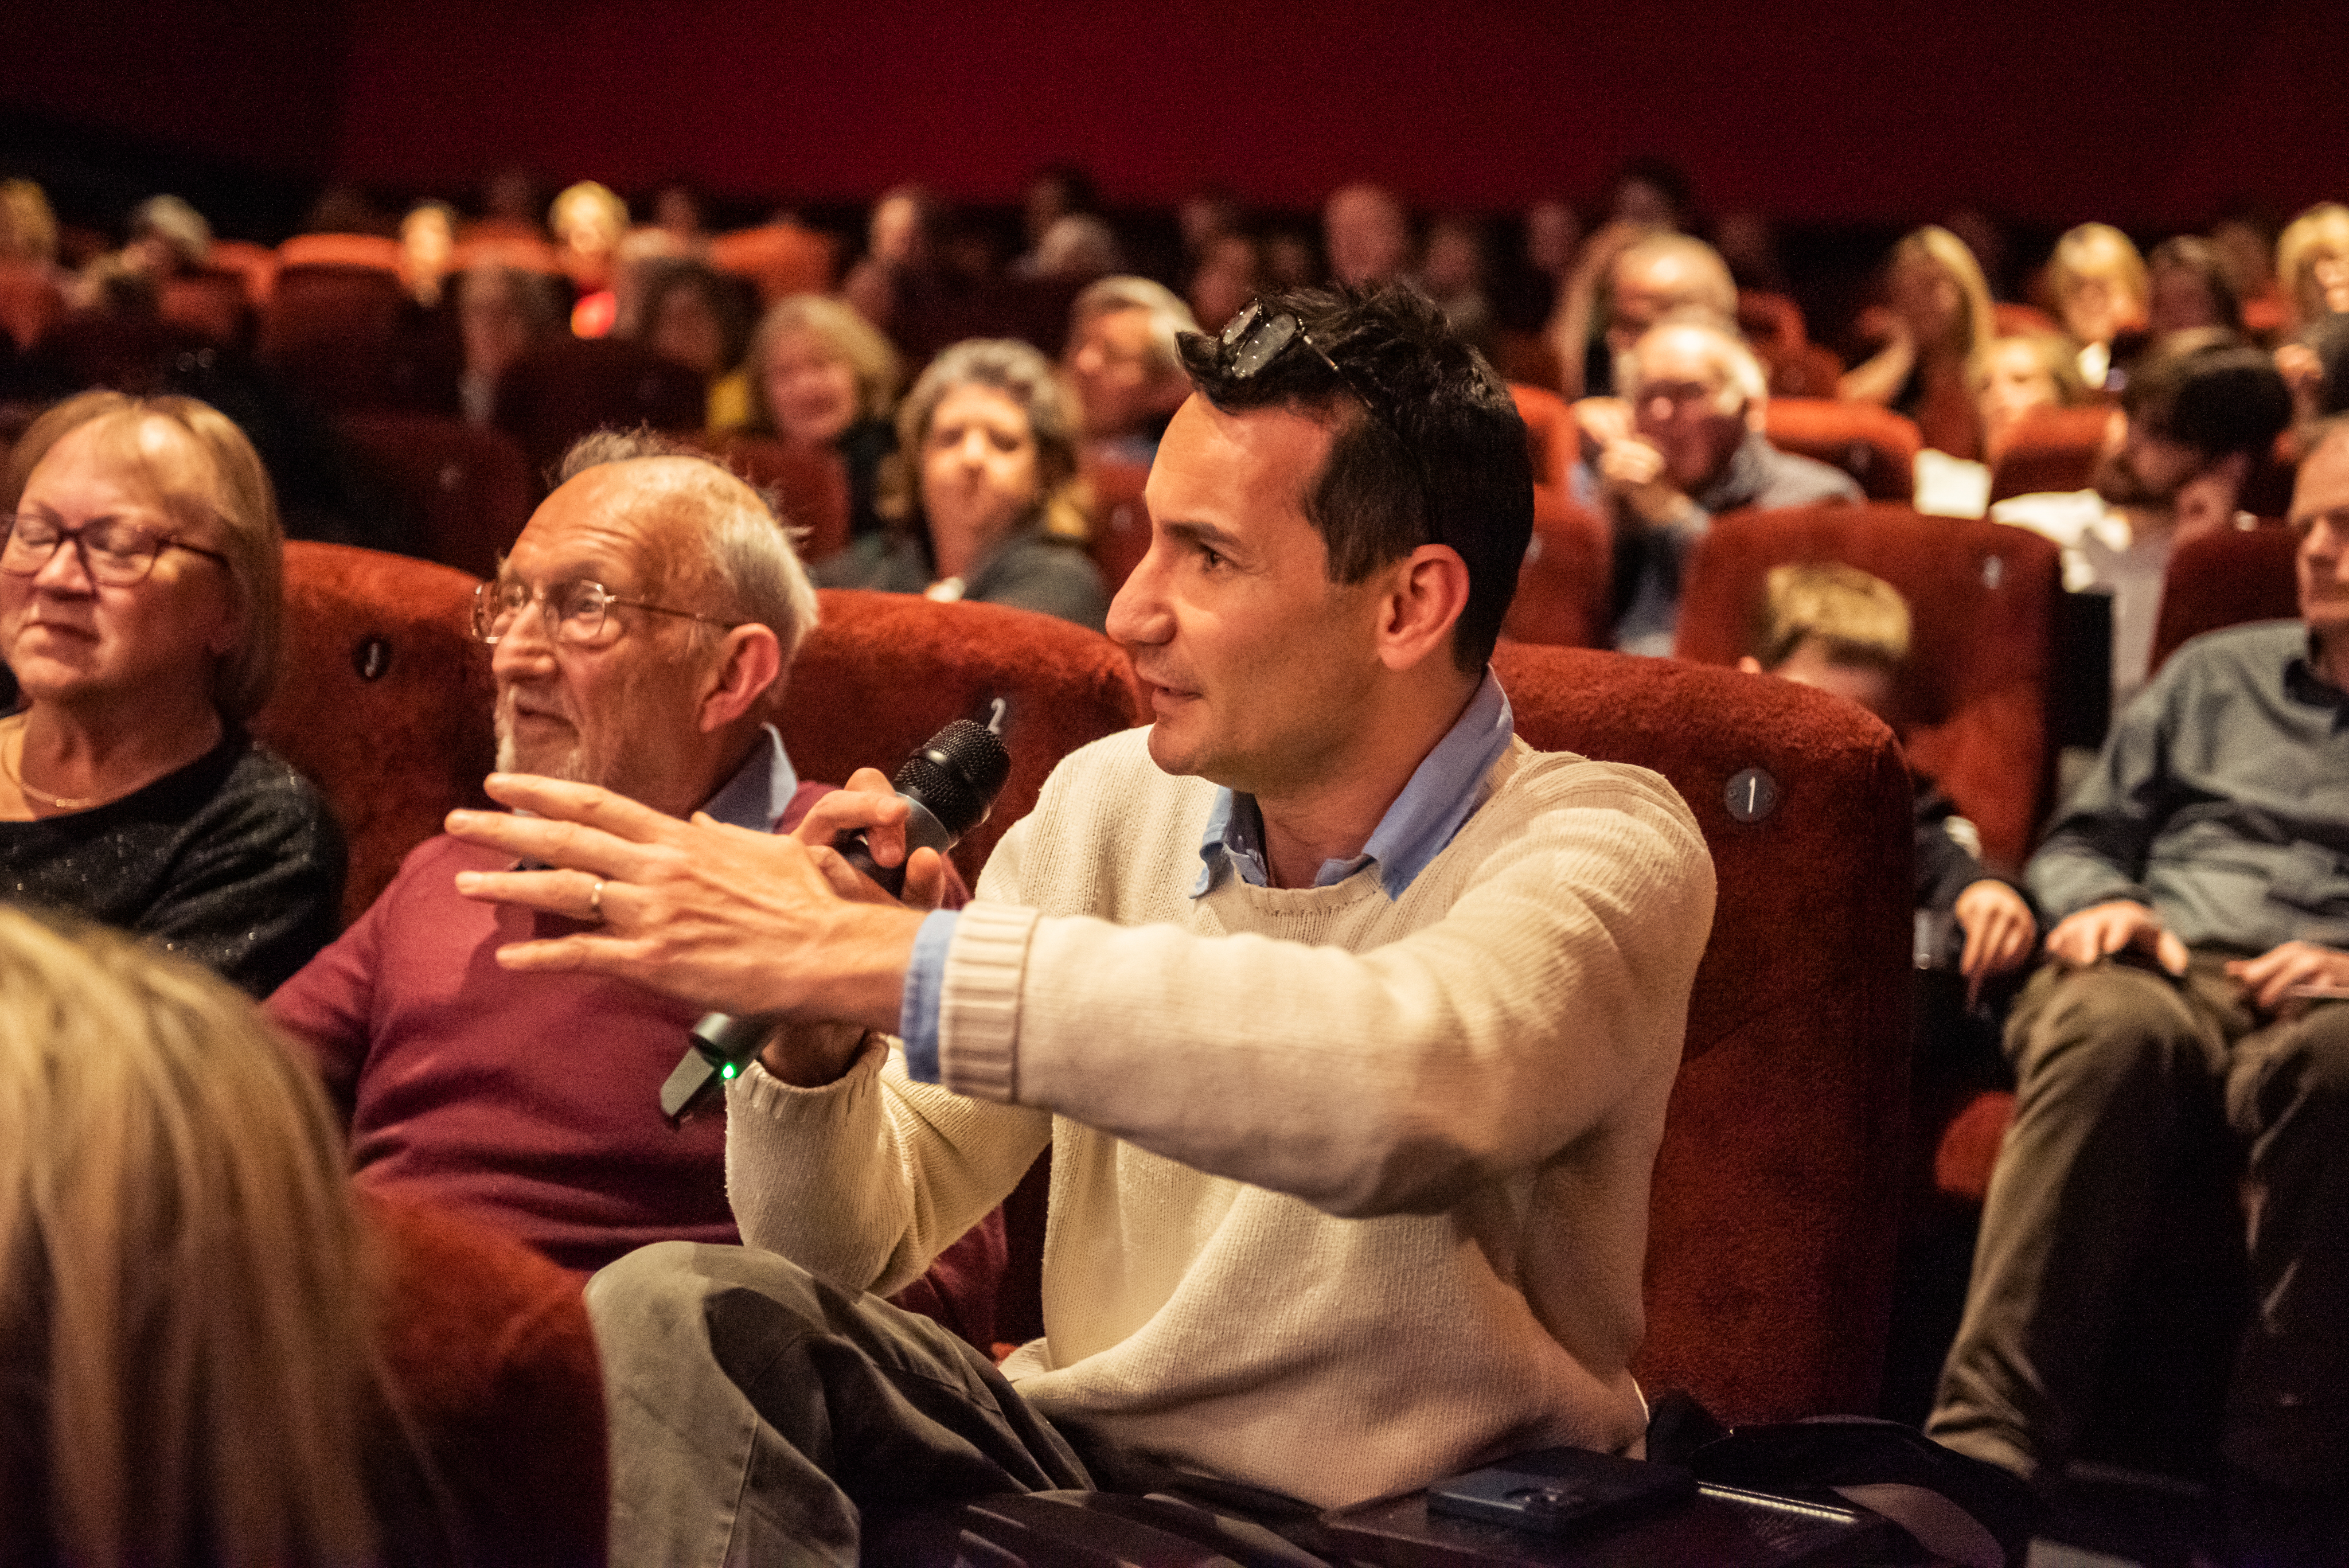 Two Years of the Chiswick Cinema - Q&A event 